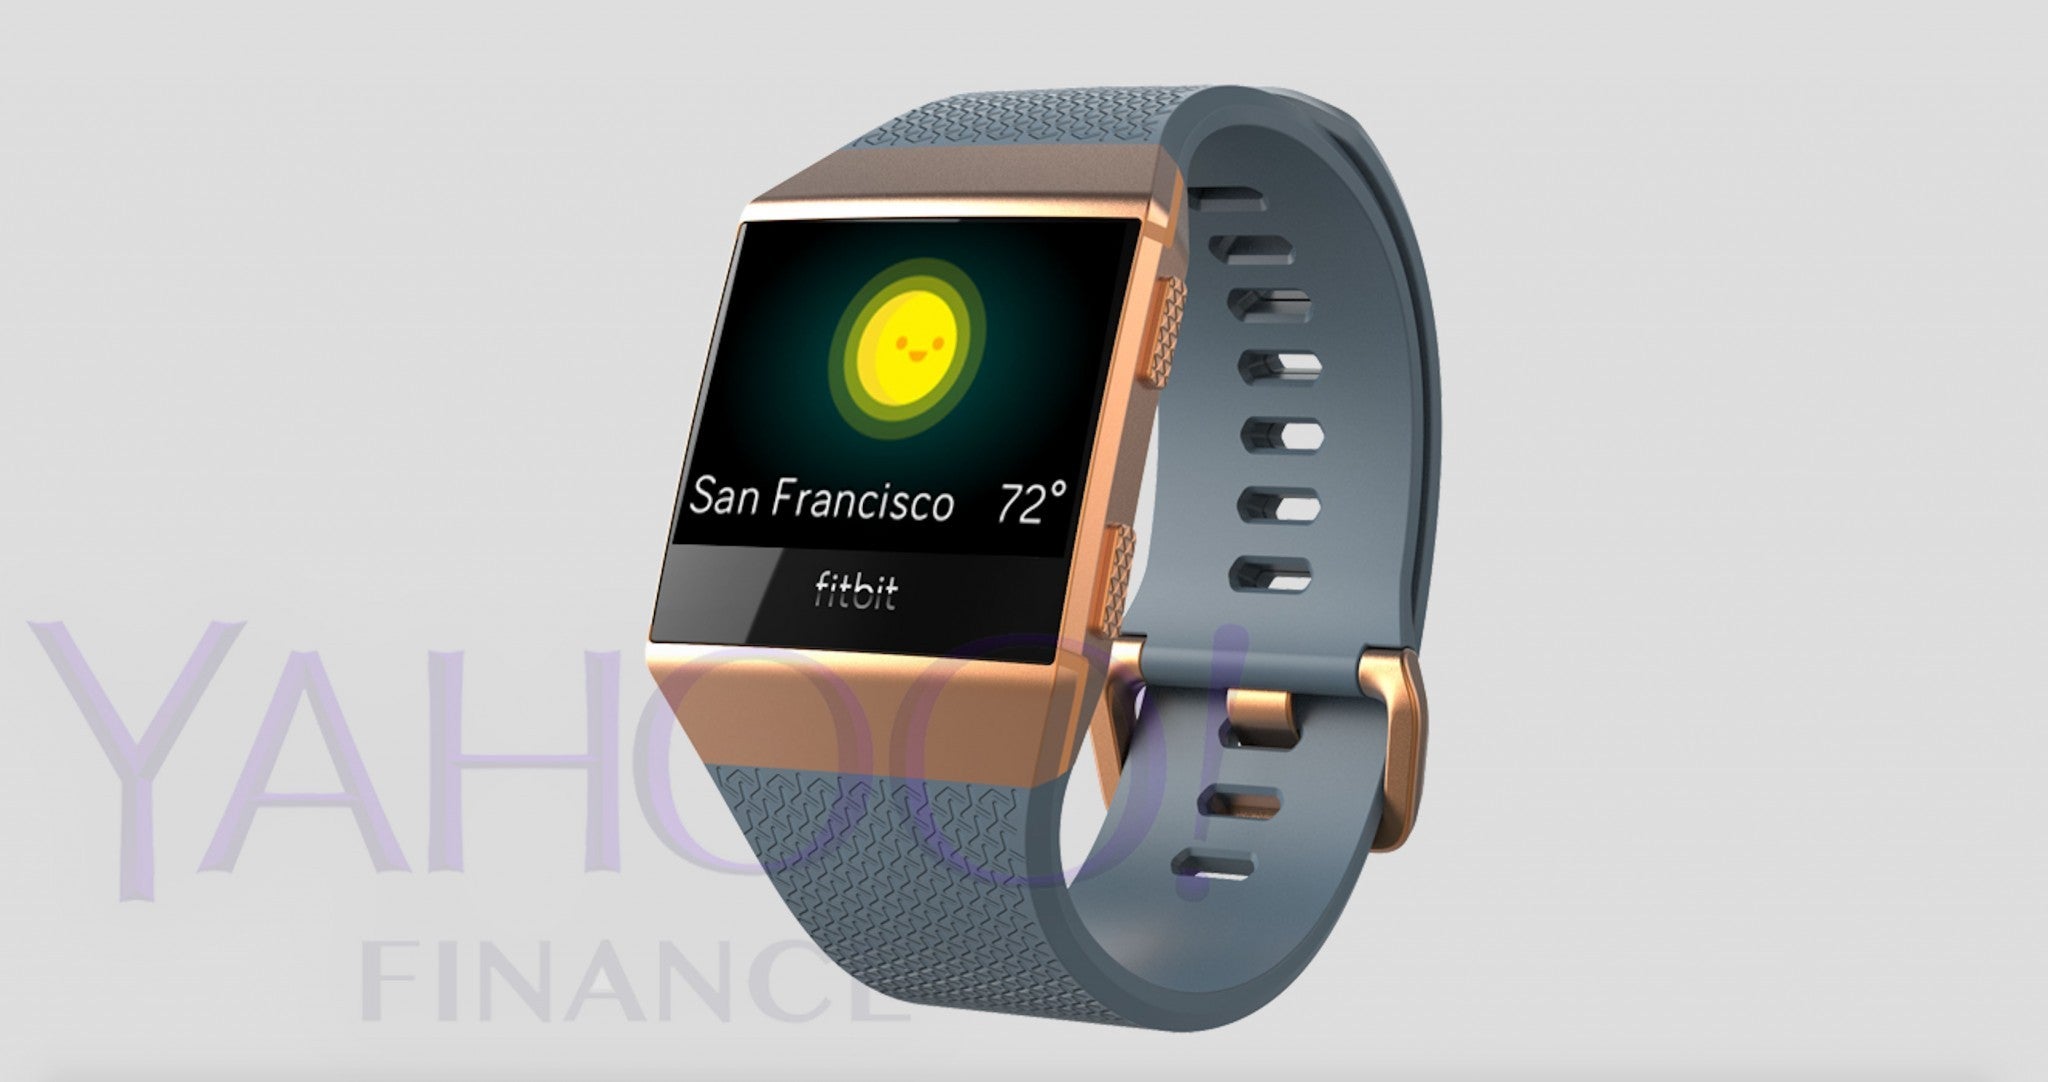 The Fitbit smartwatch leaks out, promises 4 days of battery life